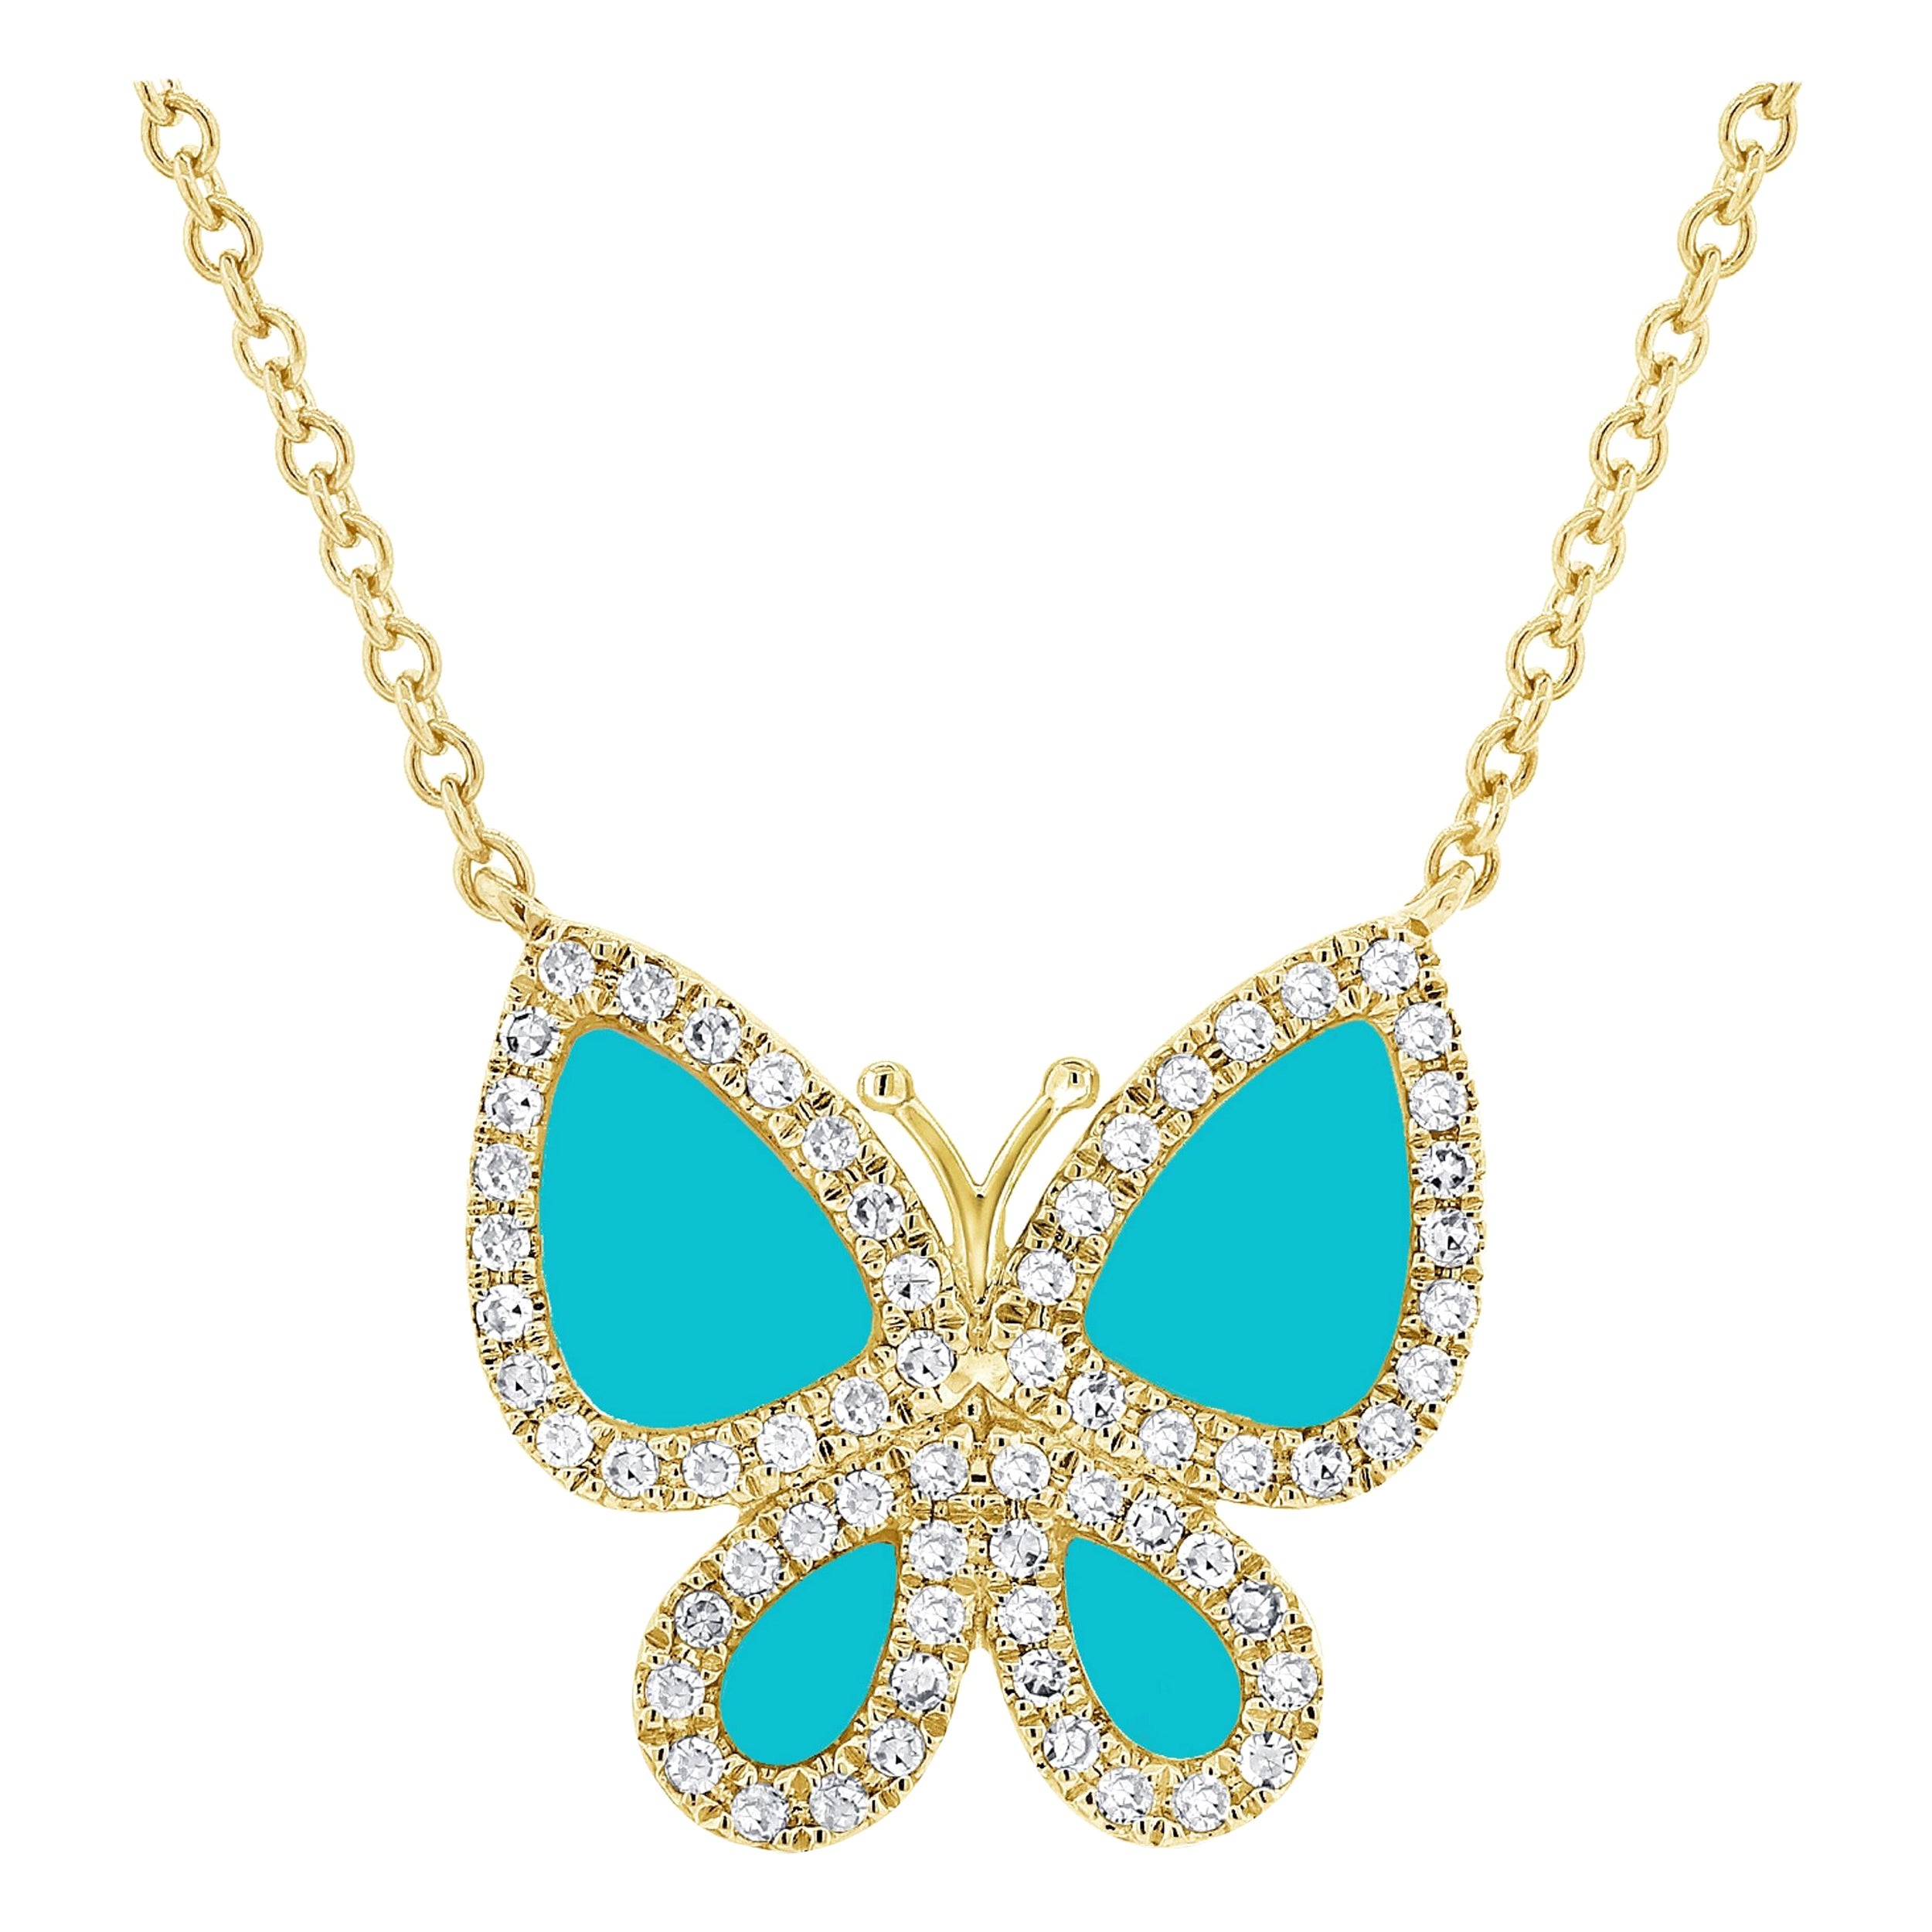 14 Karat Yellow Gold 0.15 Carat Diamond and Turquoise Butterfly Necklace